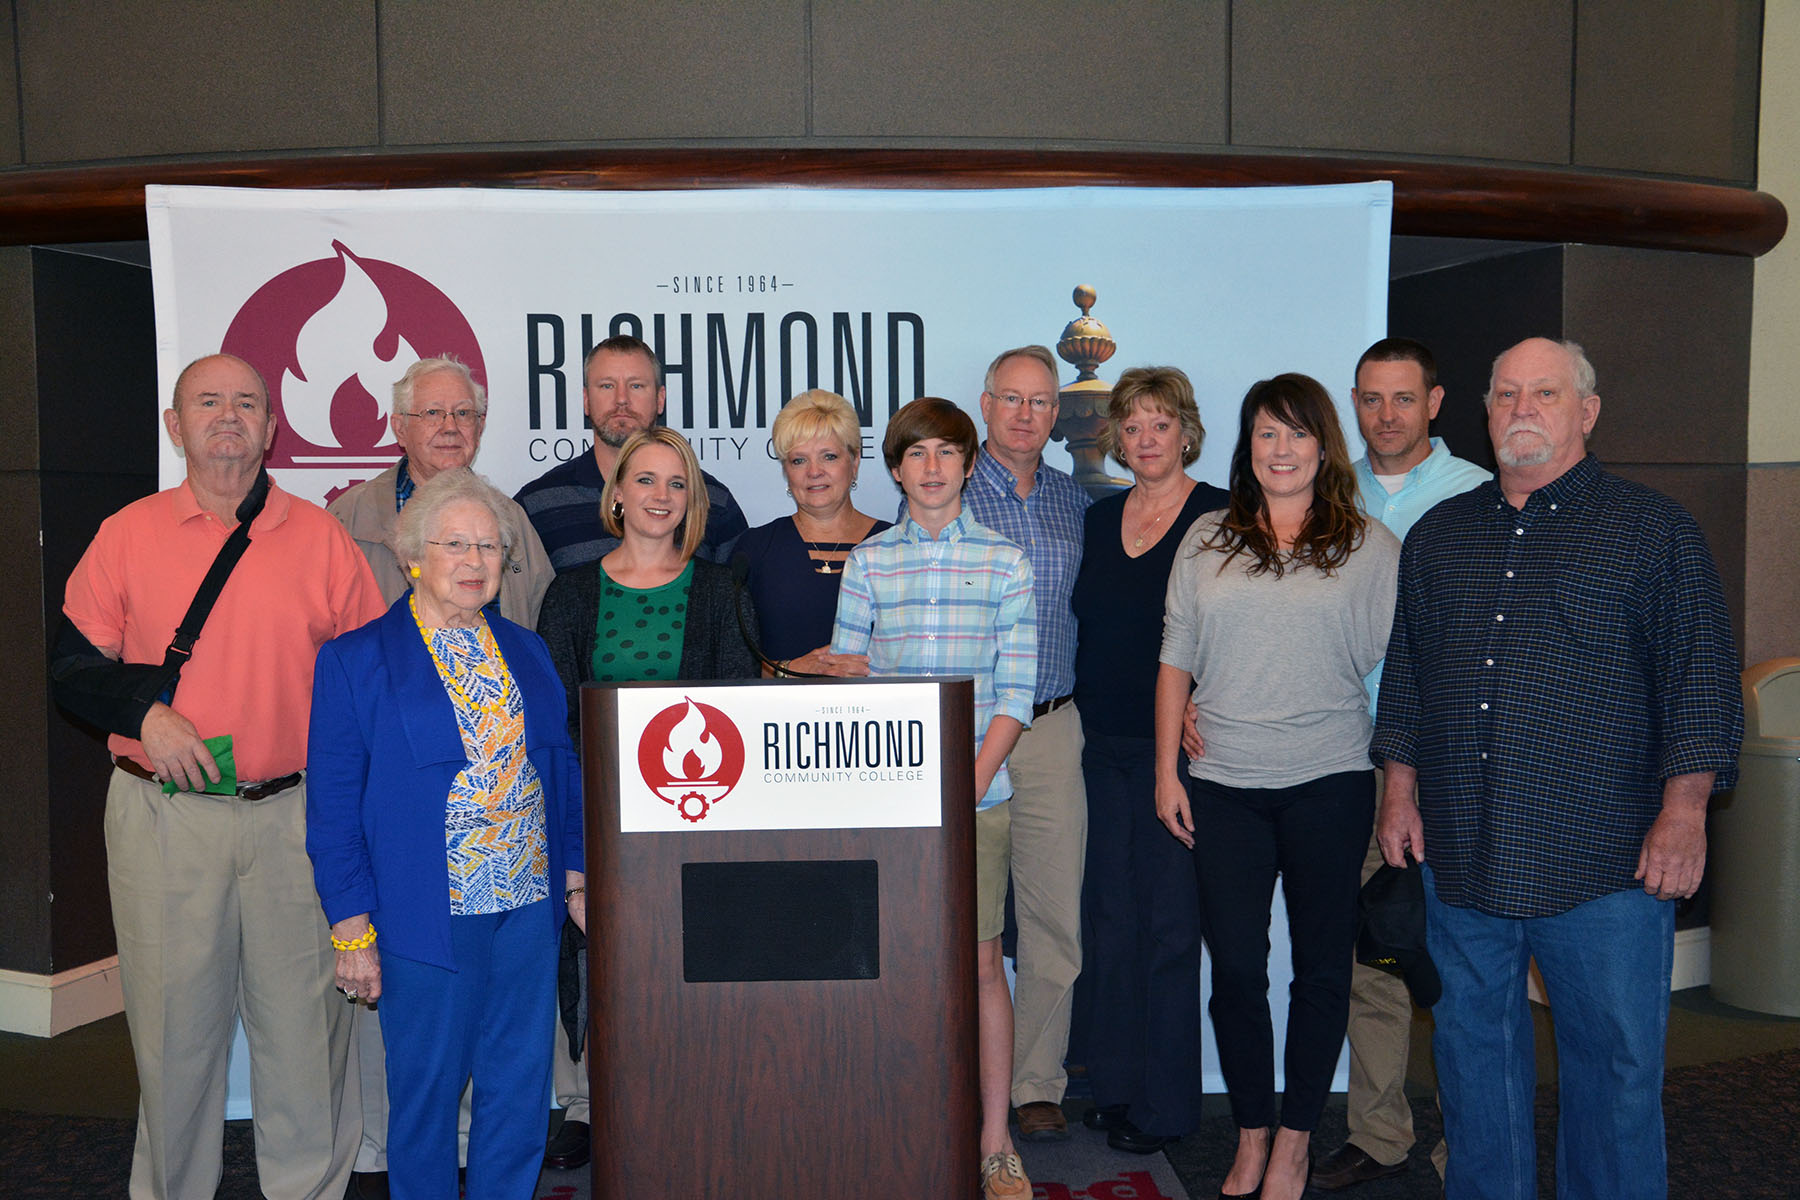 Pictured are members of the Joshua Michael Lamm family who established a scholarship in Josh's memory at Richmond Community College. 